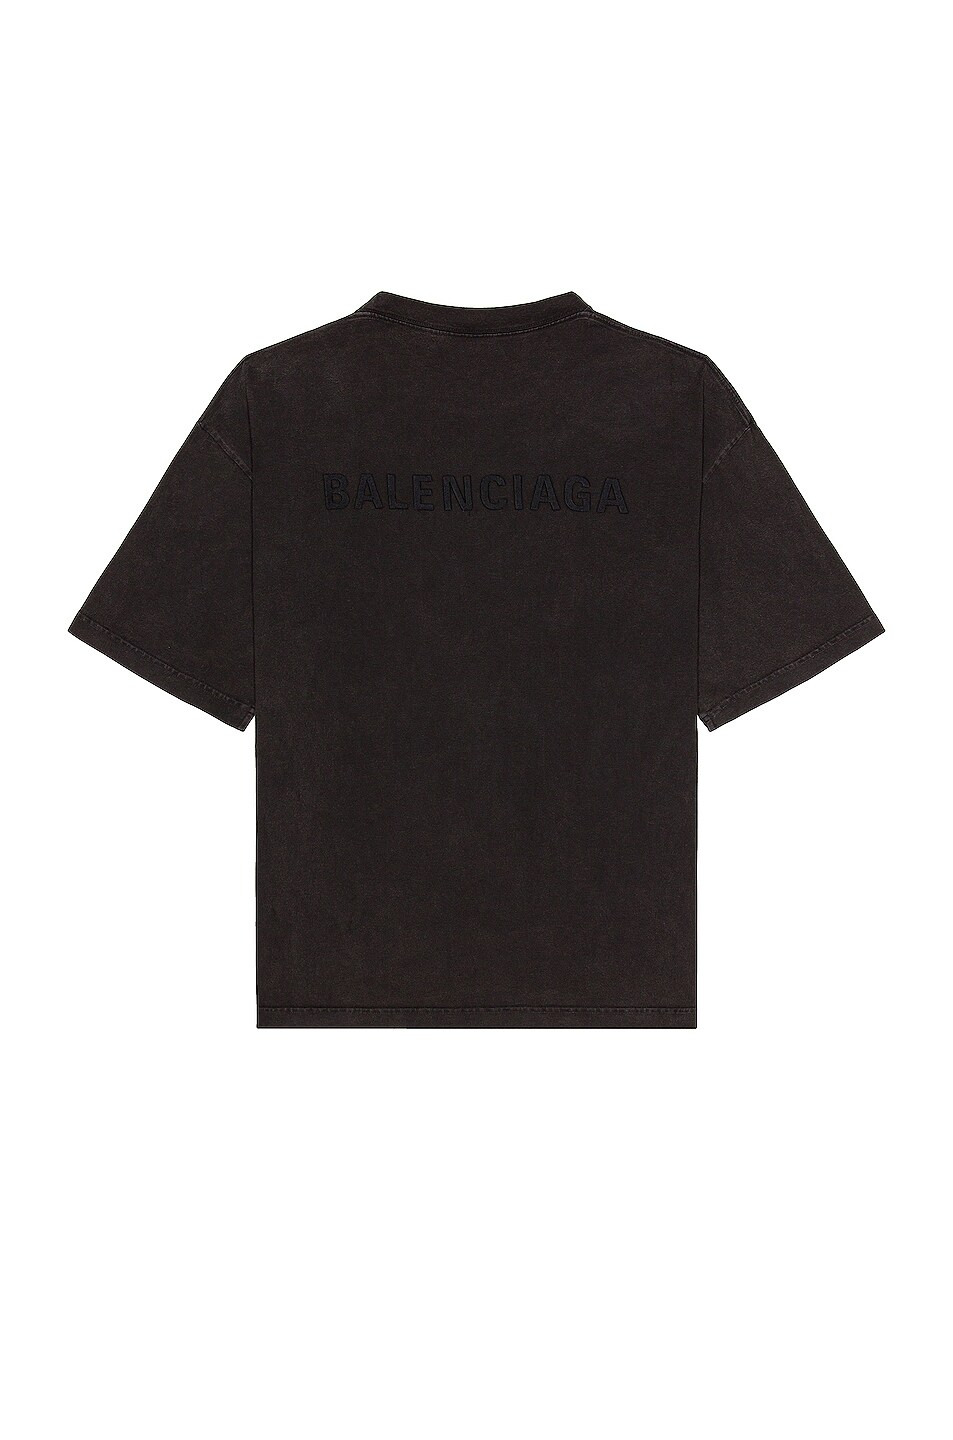 Image 1 of Balenciaga Embroidered Medium Fit T-Shirt in Black Fade Out